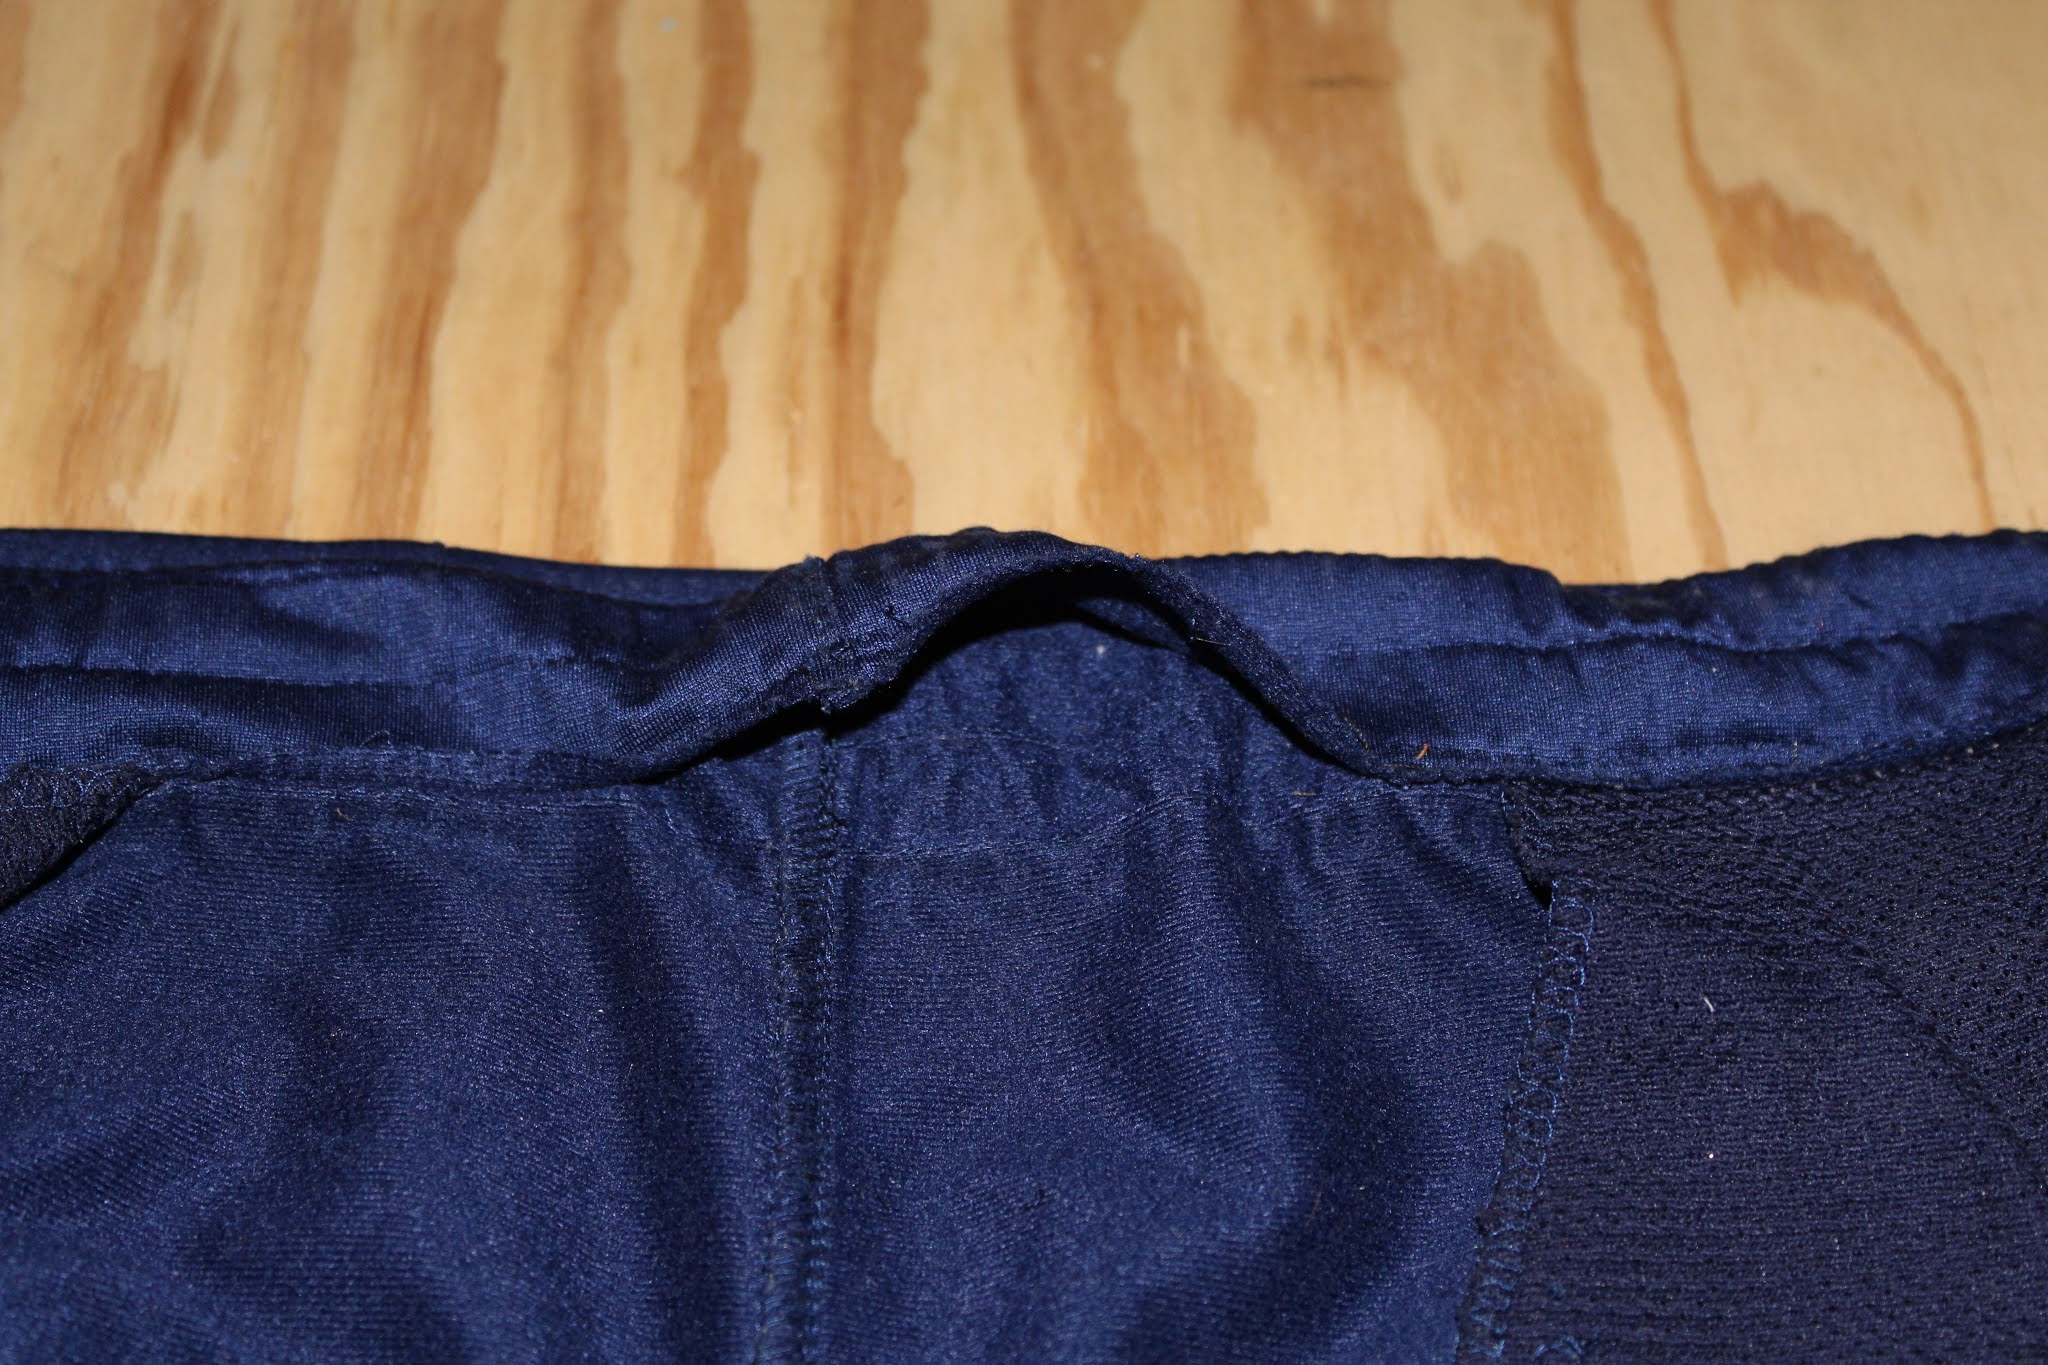 Old Timer's Habits: Replacing the elastic waistband in pants